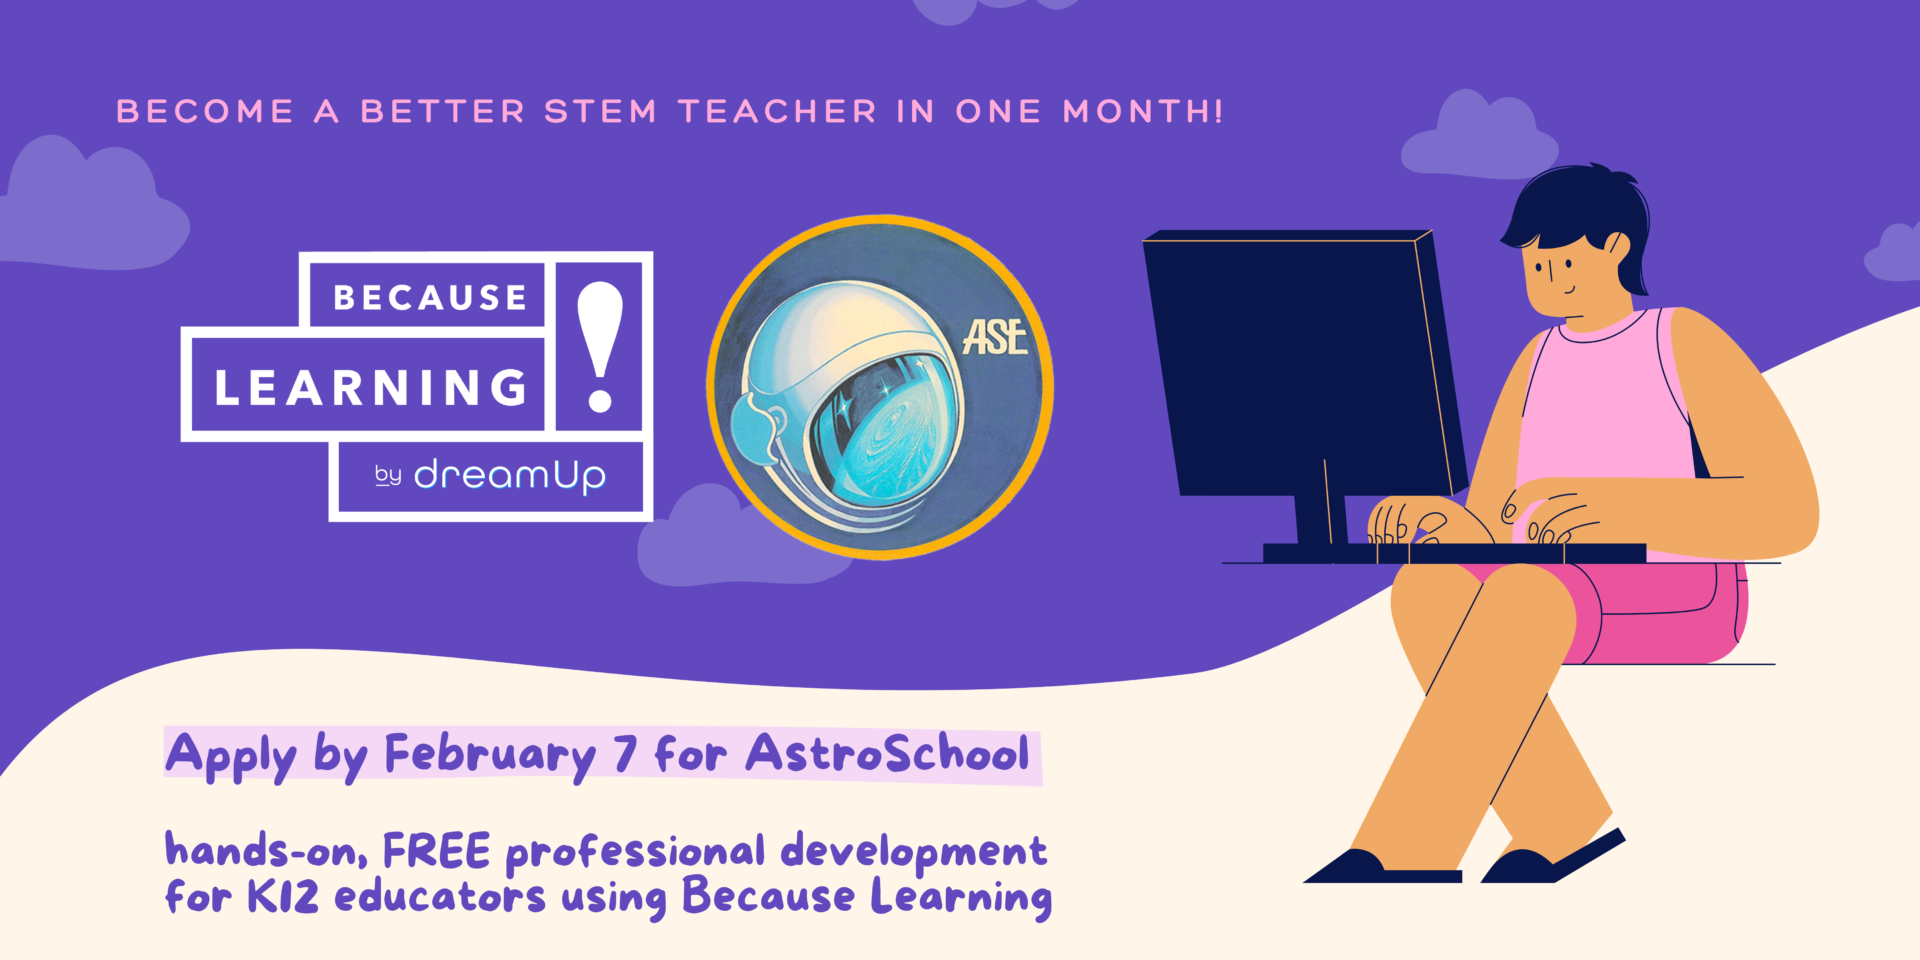 Apply by February 7 for AstroSchool